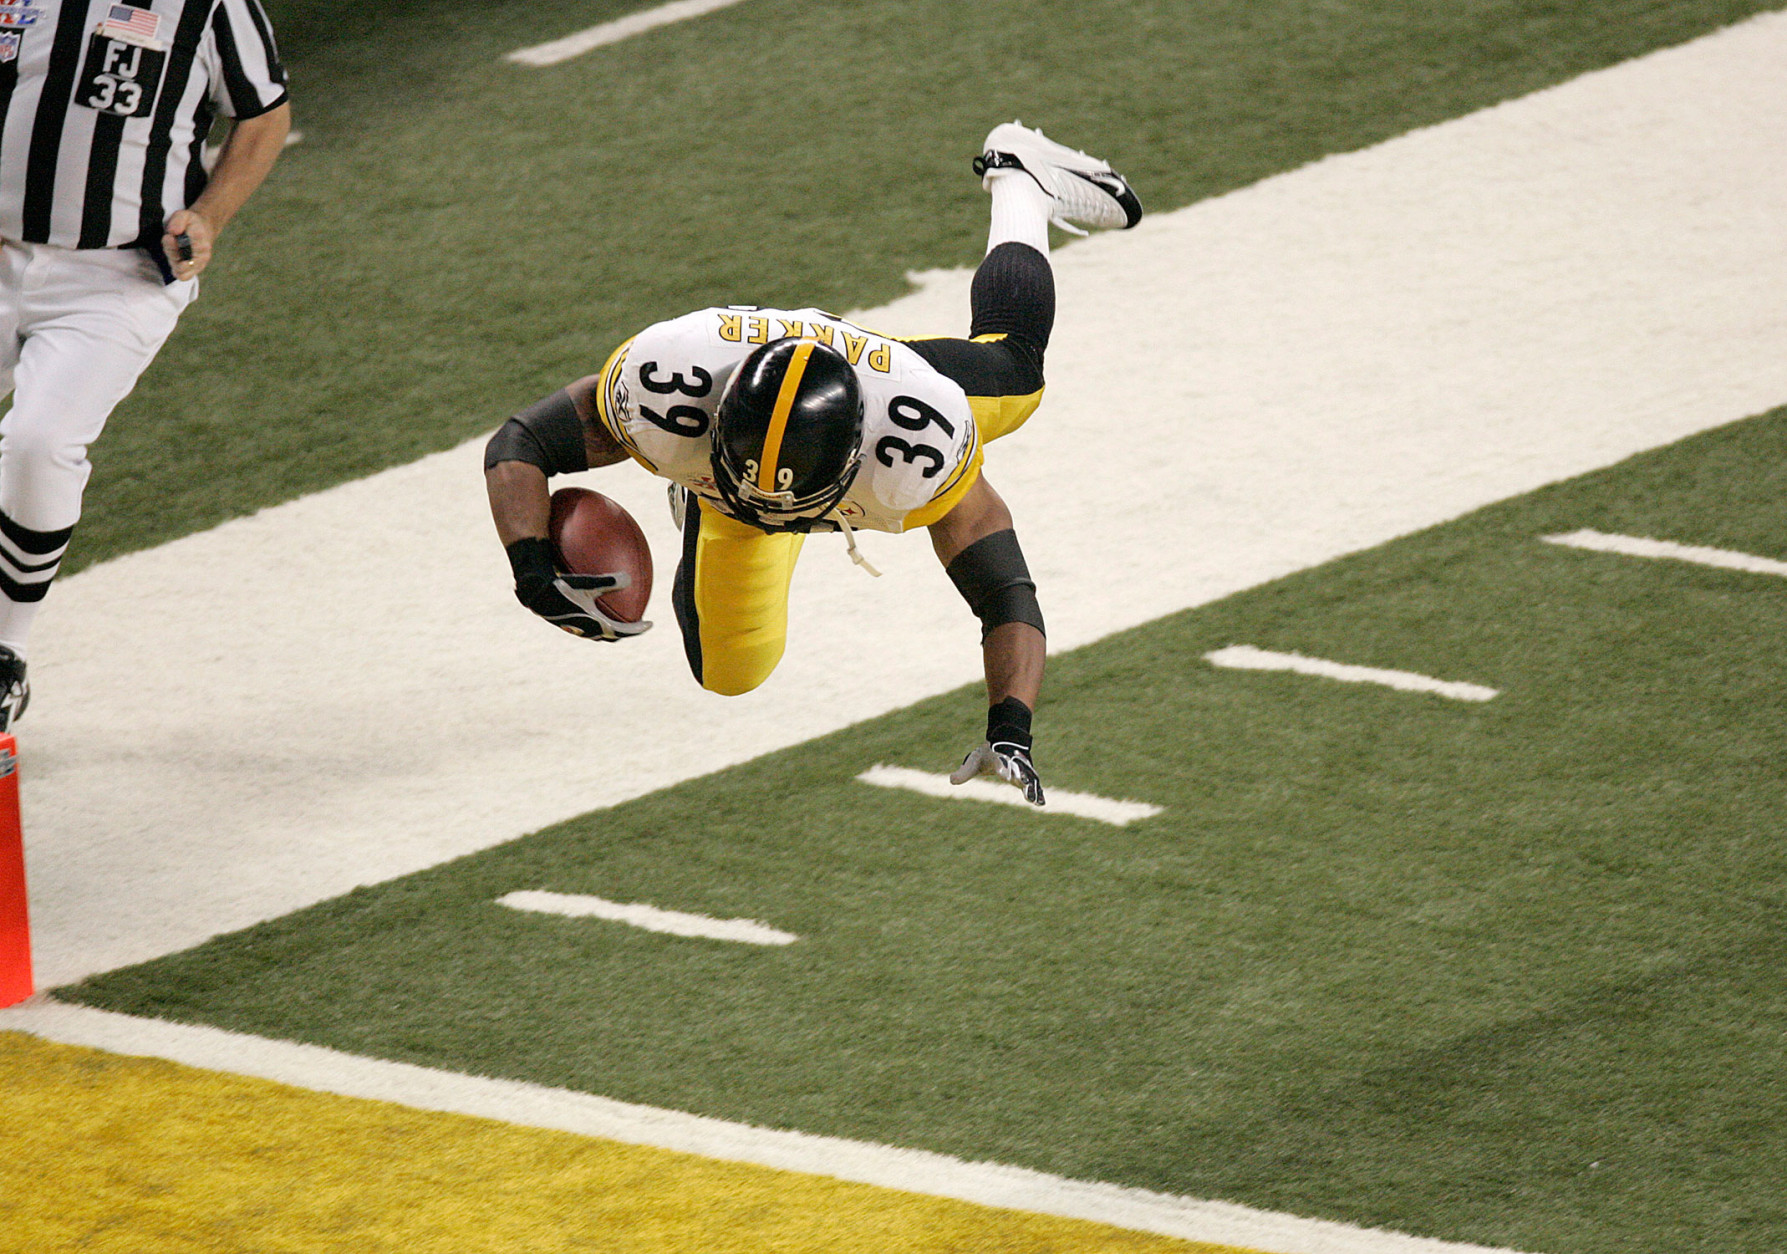 Steelers running back Willie Parker dives to teh goal line during Pittsburgh's 21-10 win over Seattle in Super Bowl XL, the Seahawks' first Super Bowl appearance. (Getty Images/Gregory Shamus)